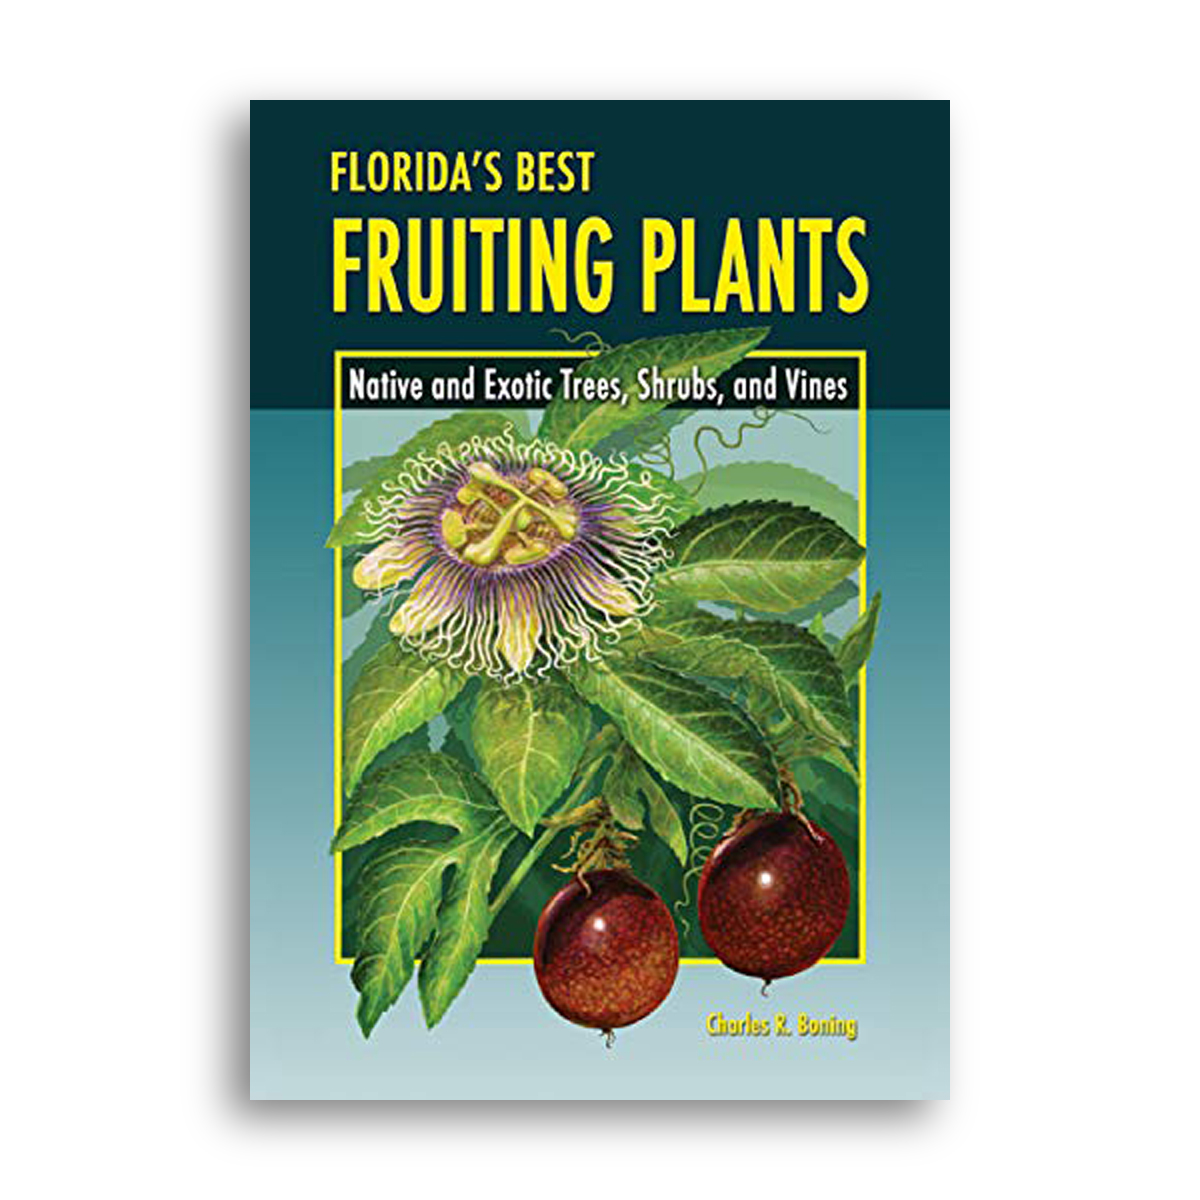 The front cover design of Florida's Best Fruiting Plants: Native and Exotic Trees, Shrubs, and Vines by Charles R. Boning, 1st edition.